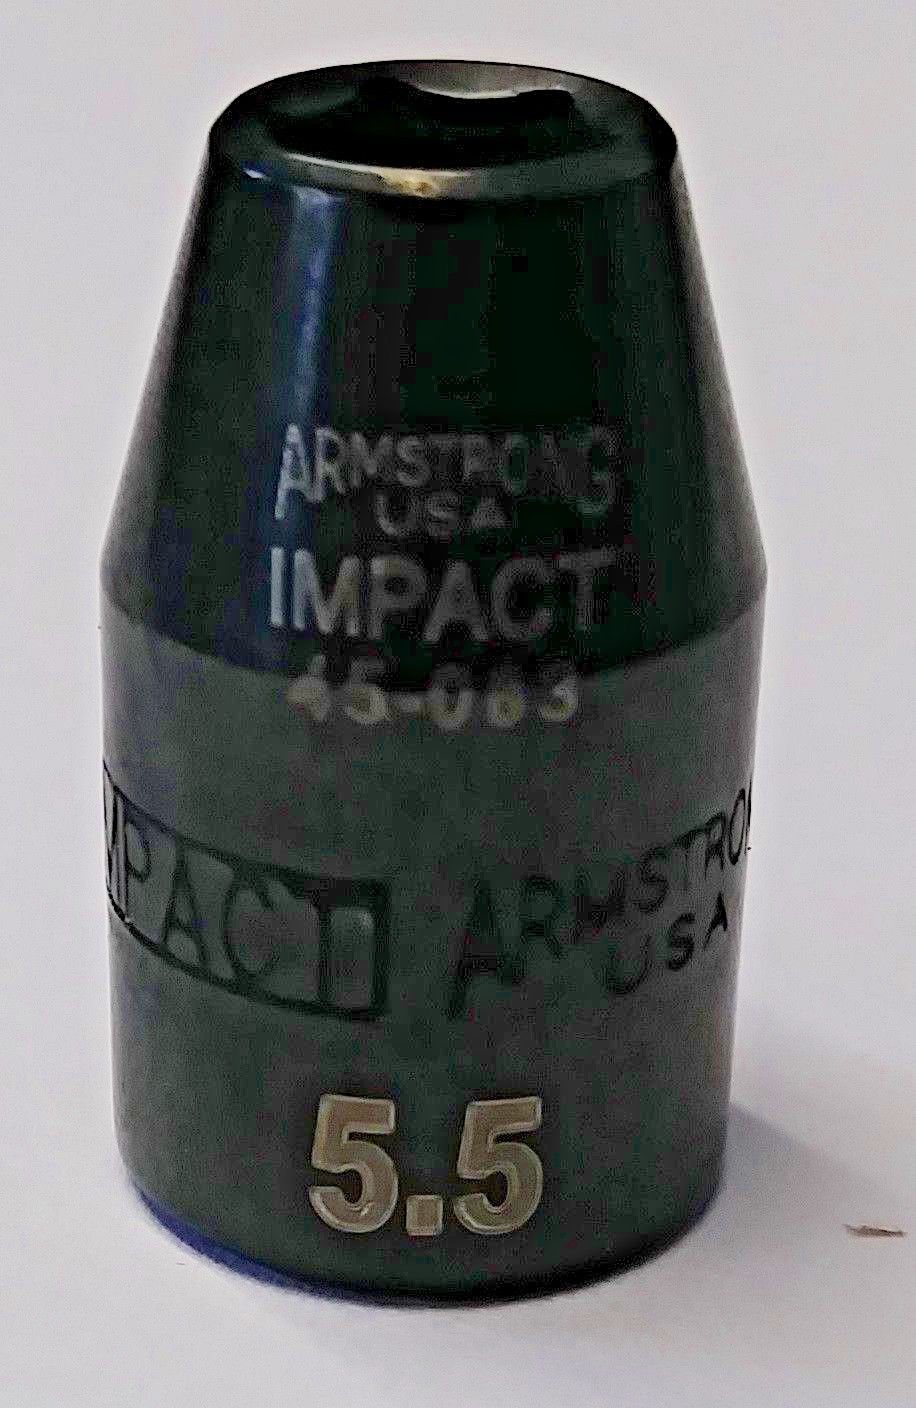 Armstrong 45-083 1/4" Drive 6 Point Impact Socket 5.5mm USA